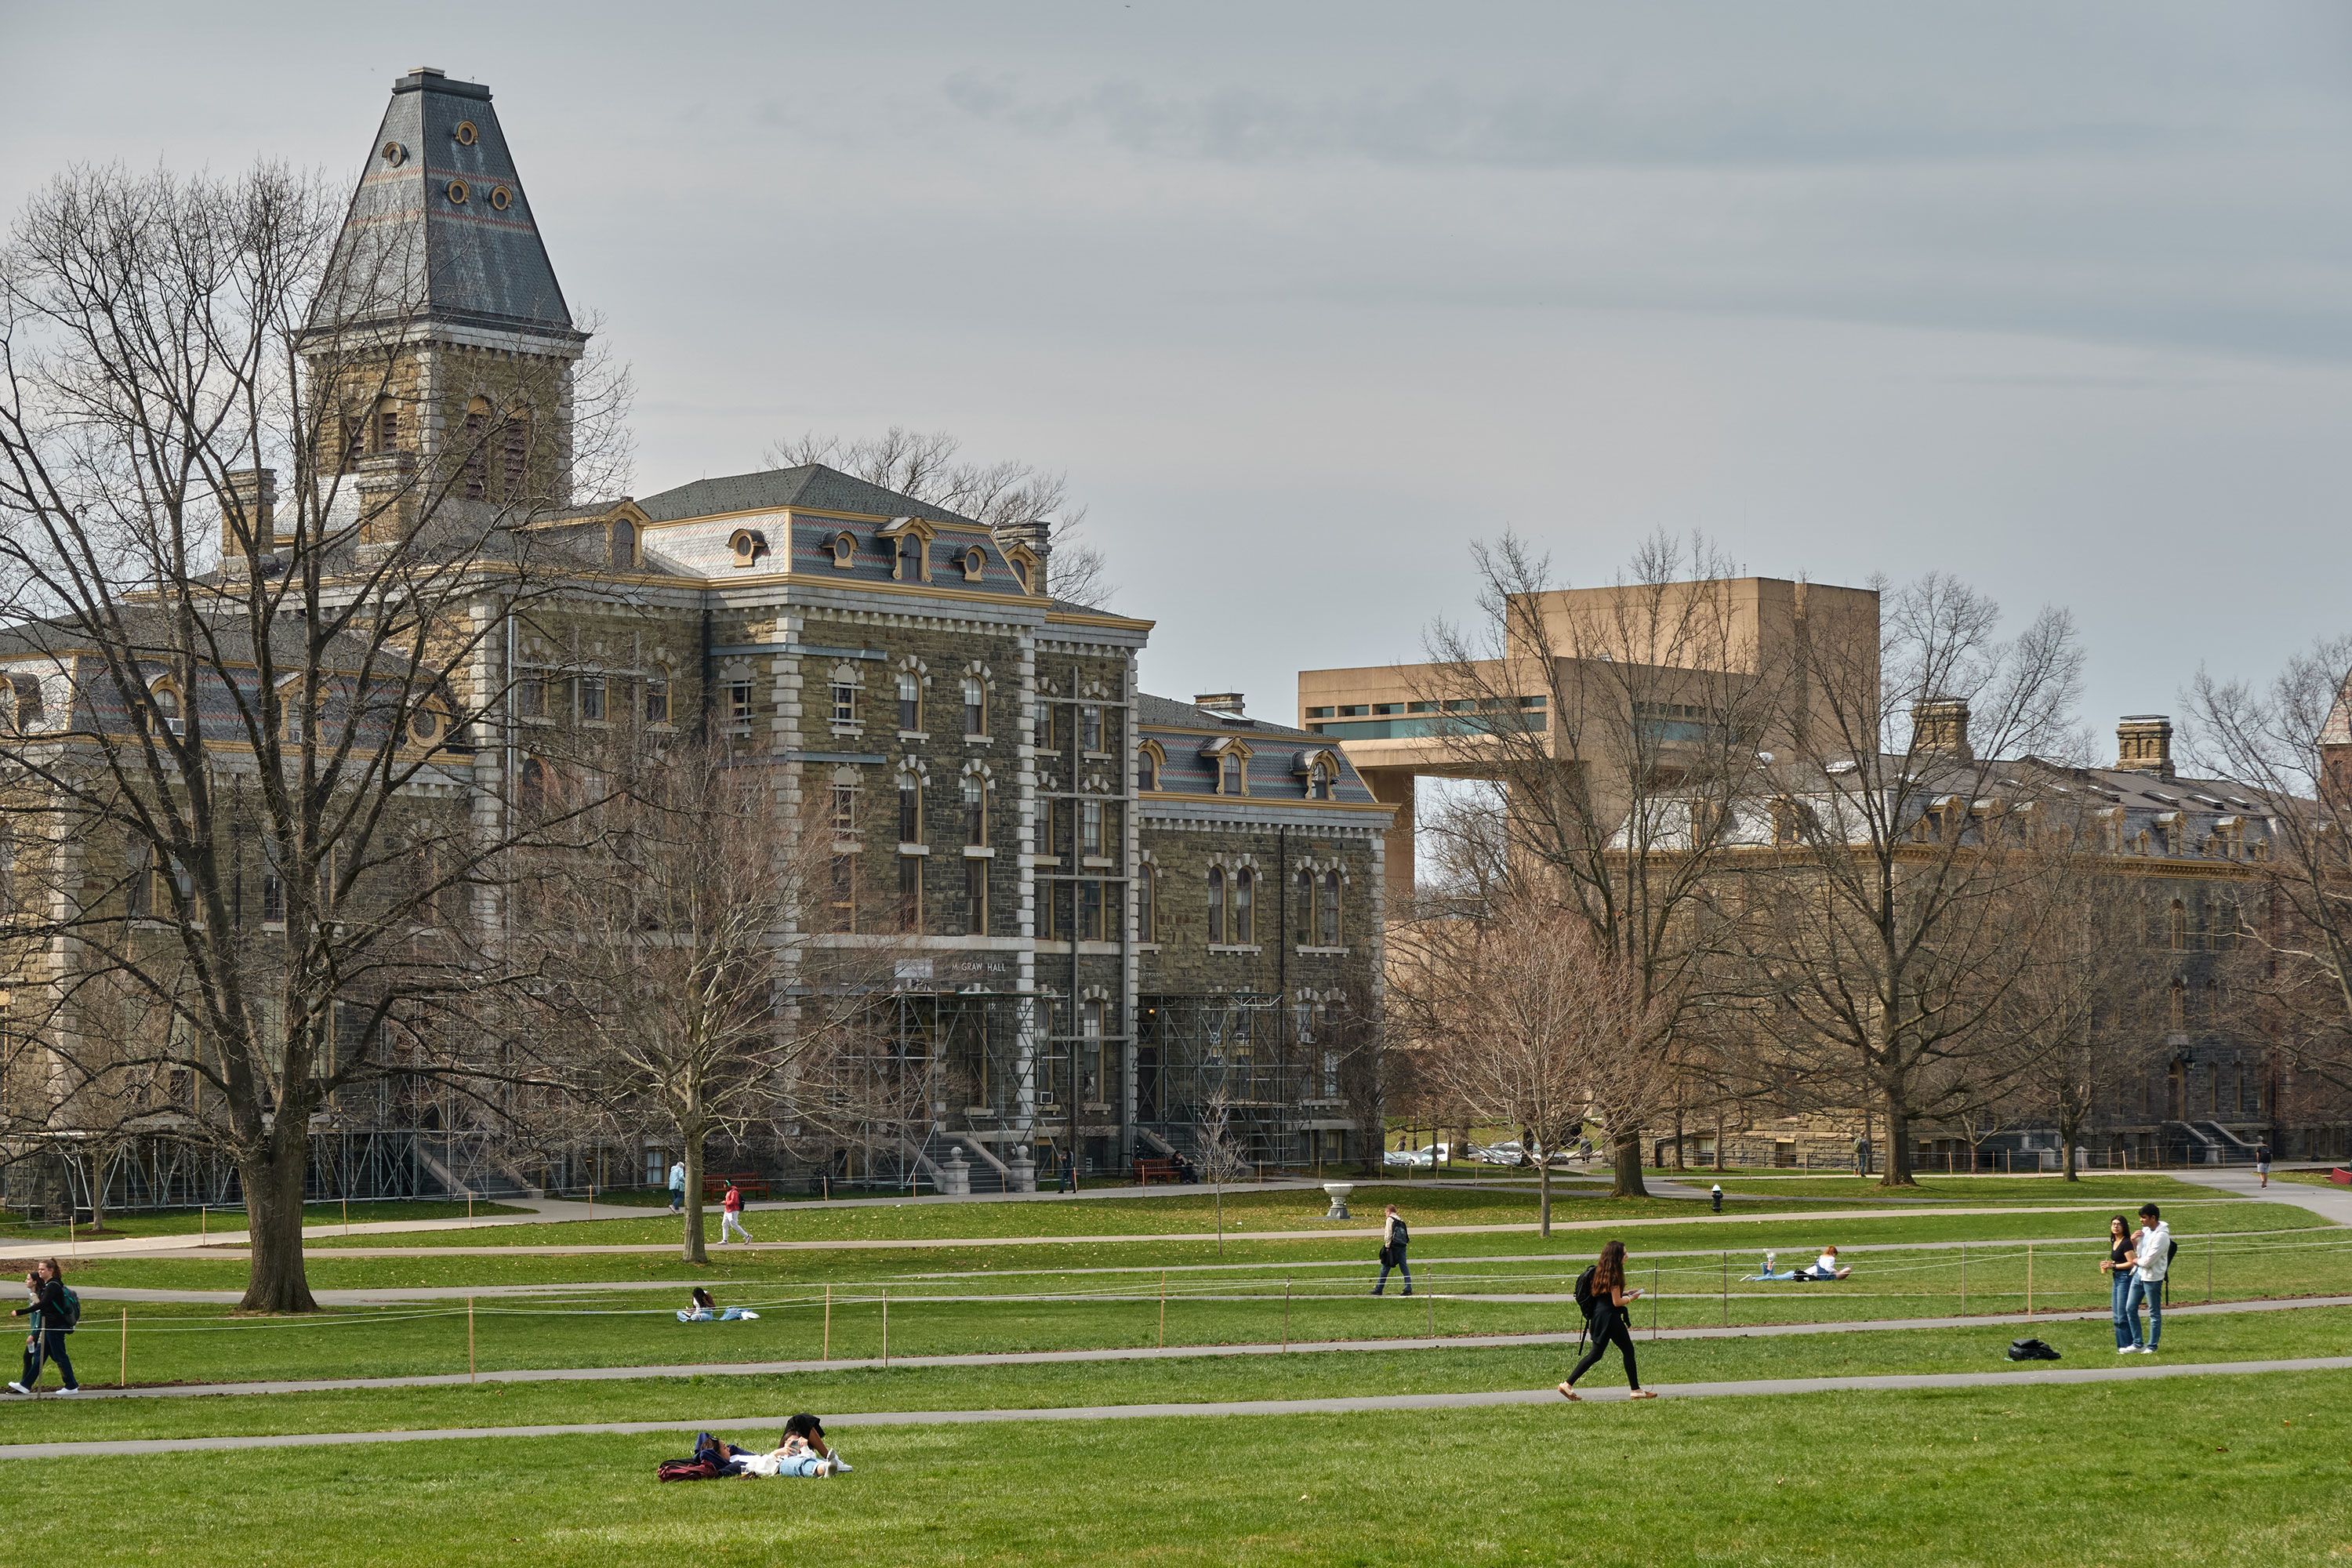 Online antisemitic threats unnerve Jewish students and spark condemnation  at Cornell University - The San Diego Union-Tribune